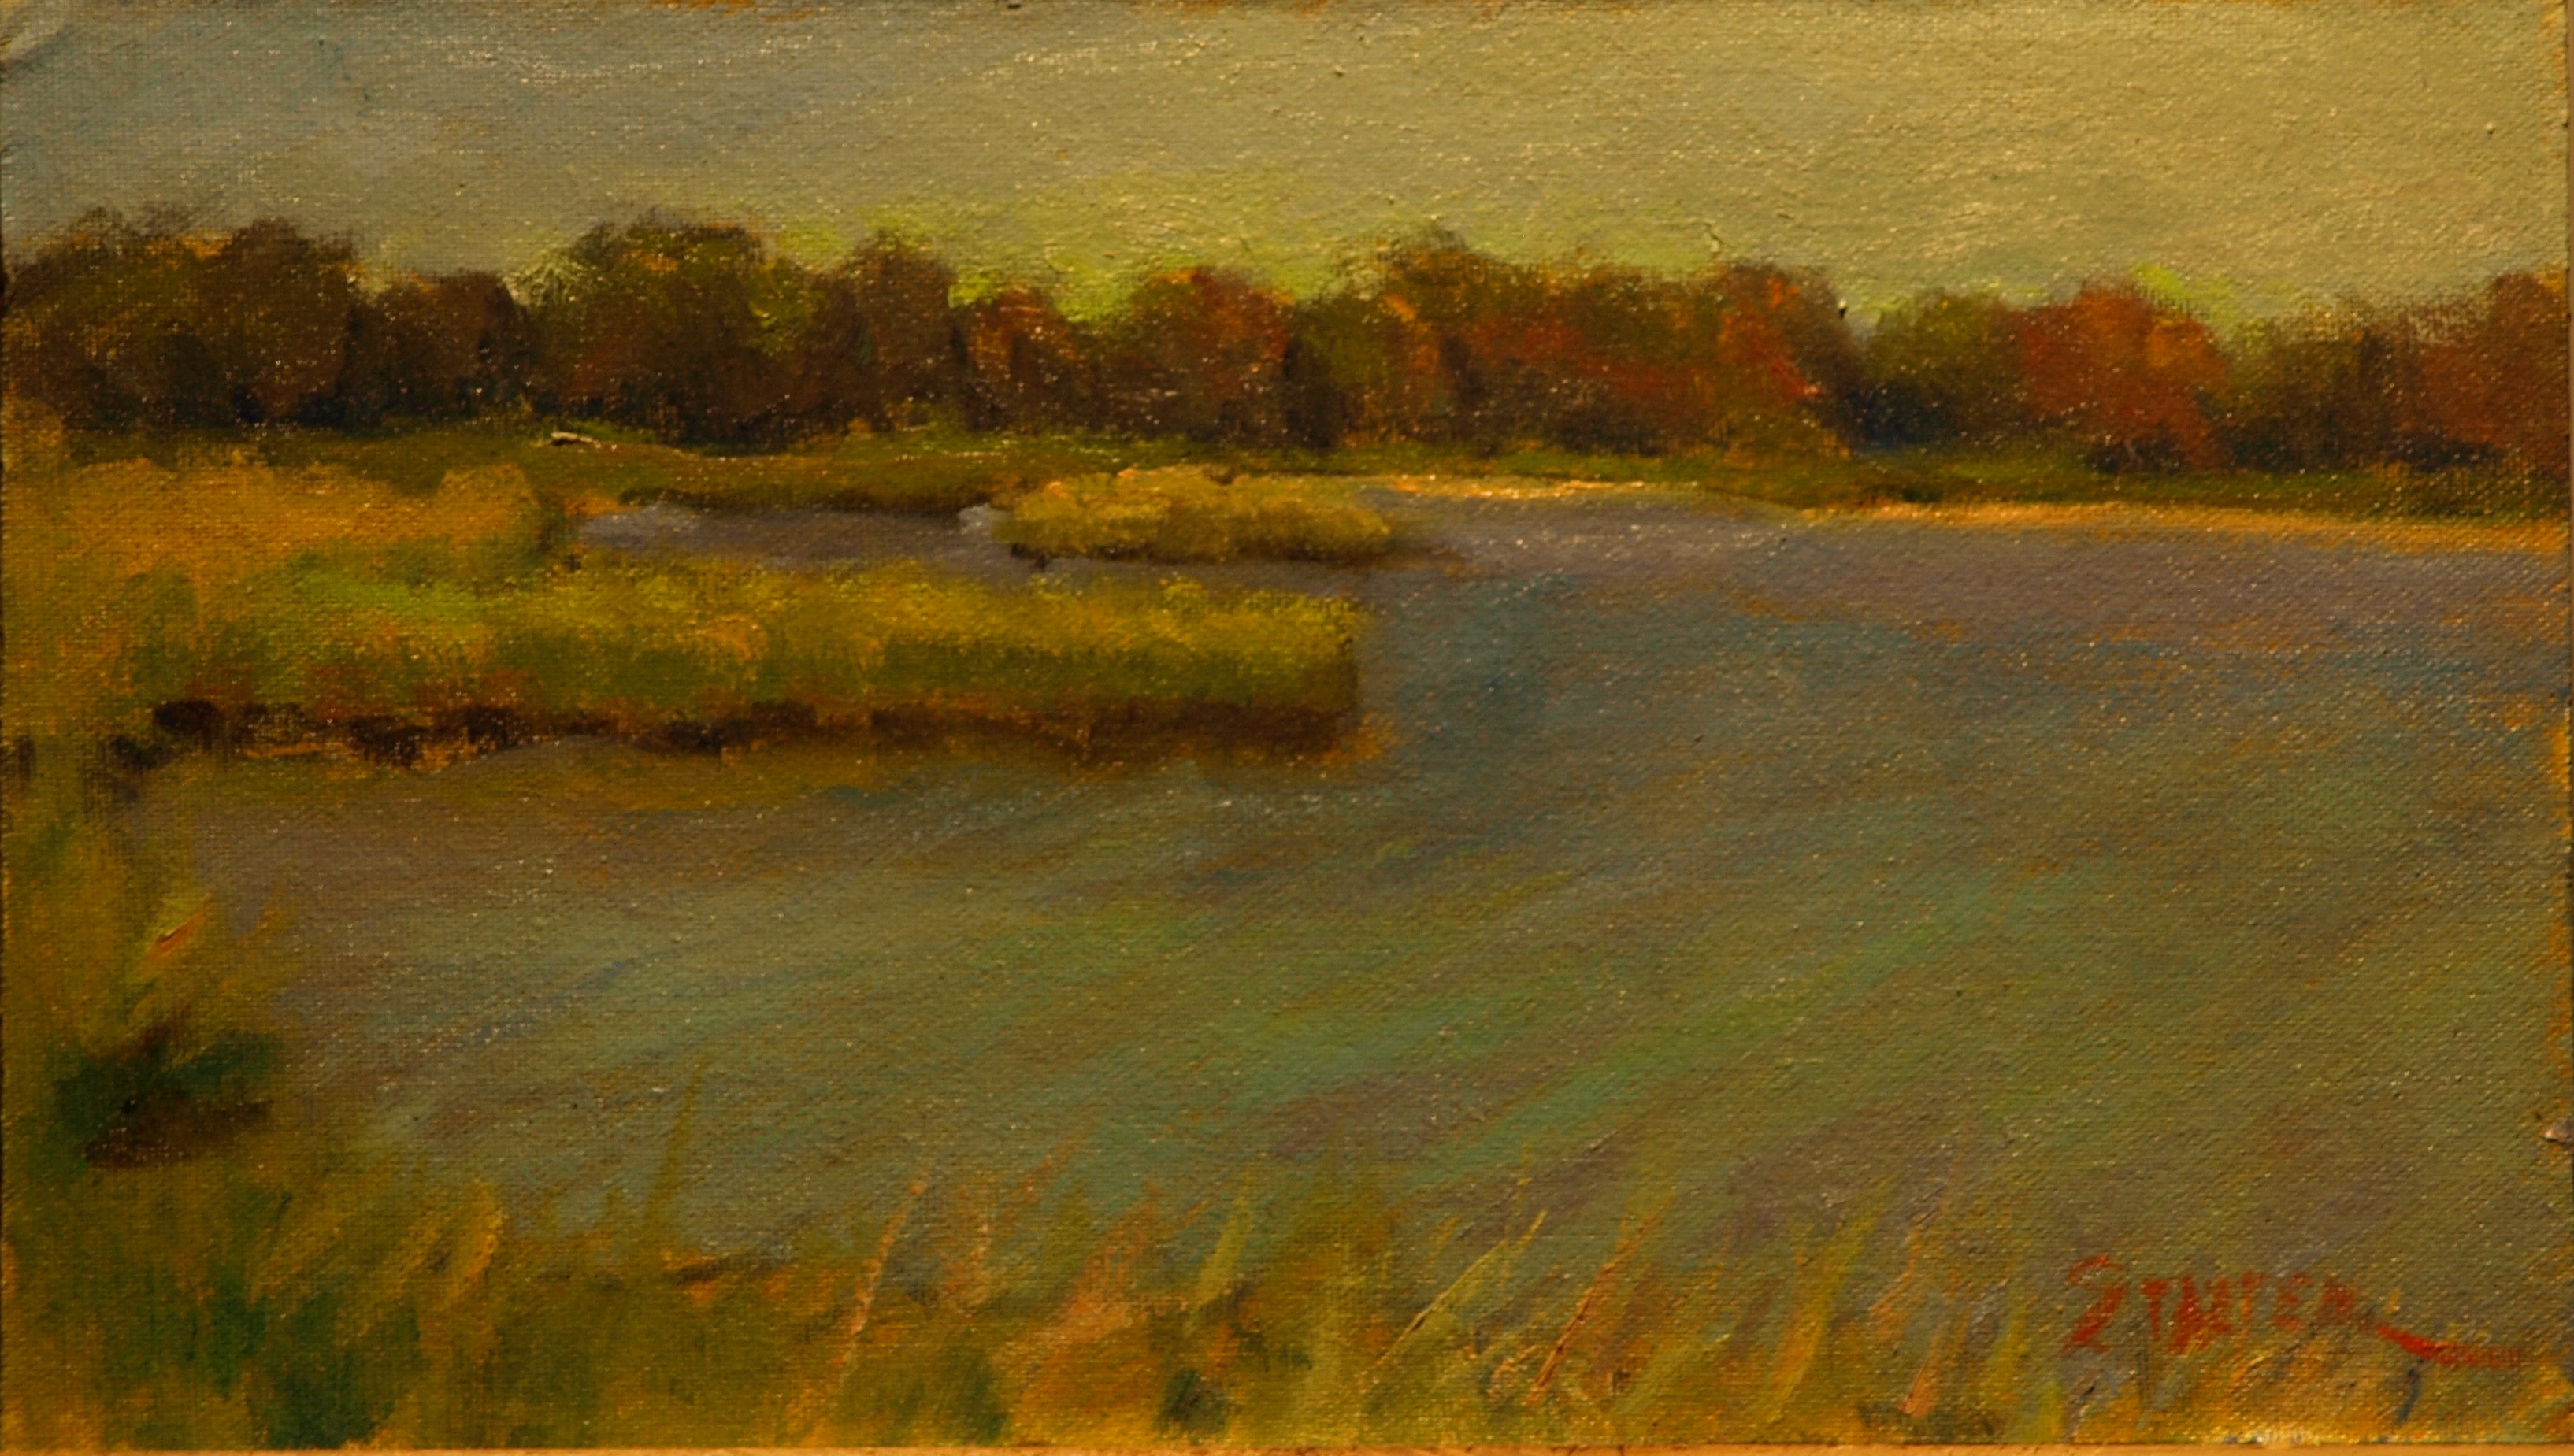 Palmer Pond, Oil on Linen on Panel, 8 x 14 Inches, by Richard Stalter, $225